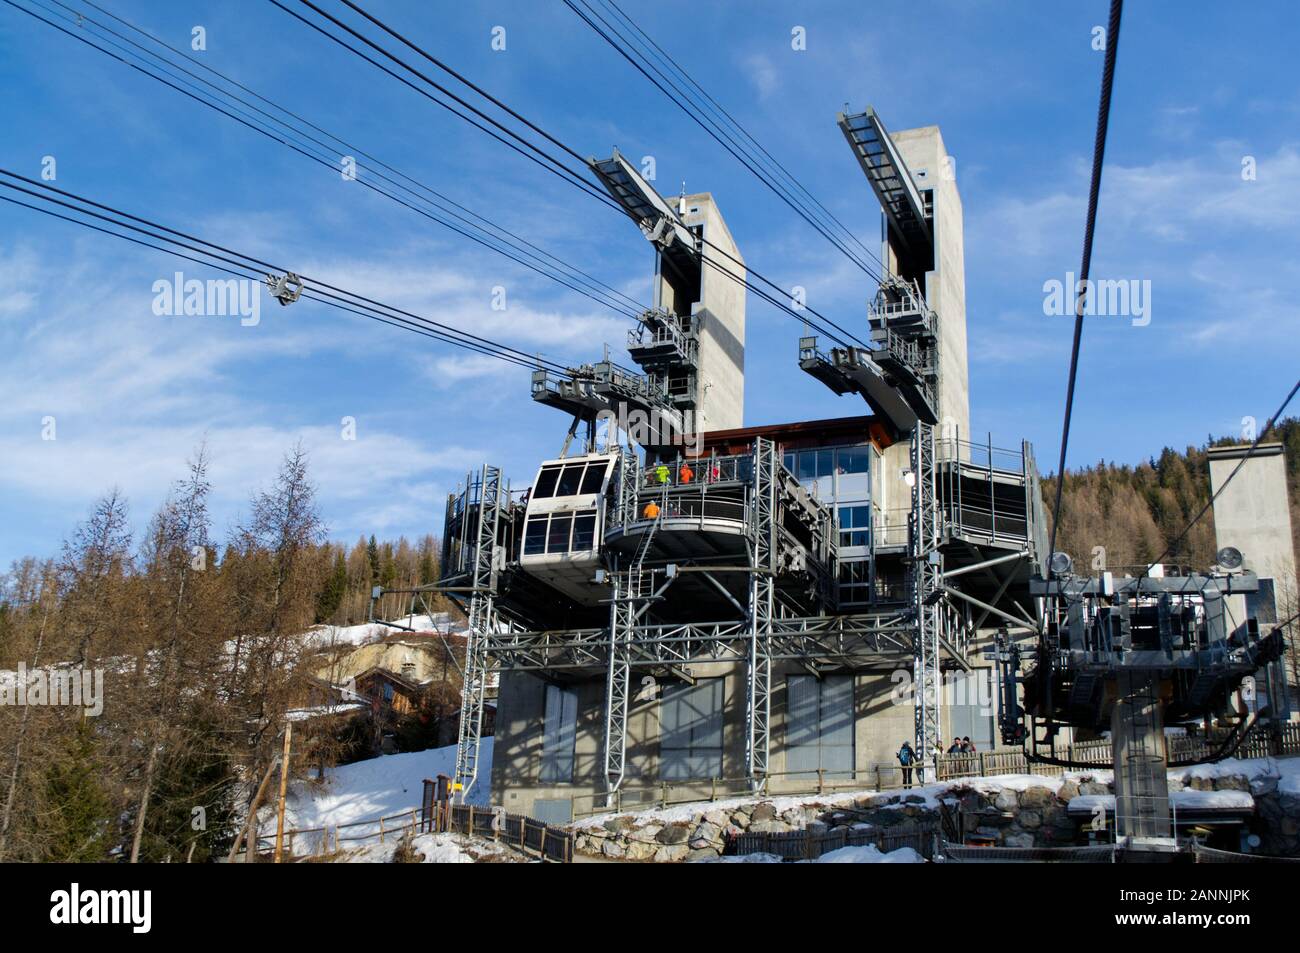 The cable car station of the Vanoise Express on the Peisey Vallandry / Les Arcs side of the crossing. Stock Photo